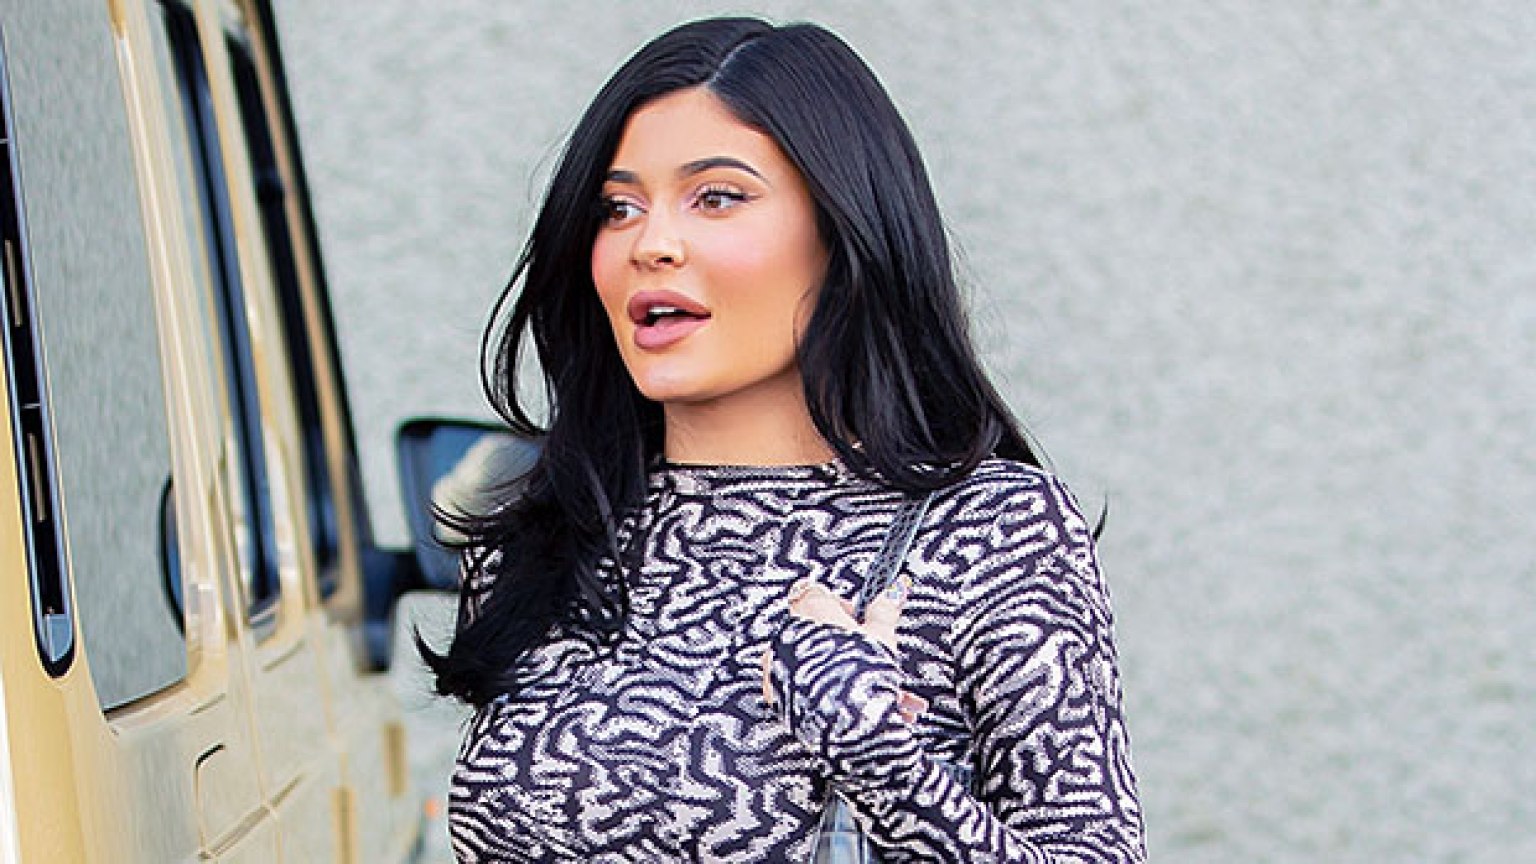 Kylie Jenner’s Tight Bodysuit: See Her Patterned Outfit – Pics ...